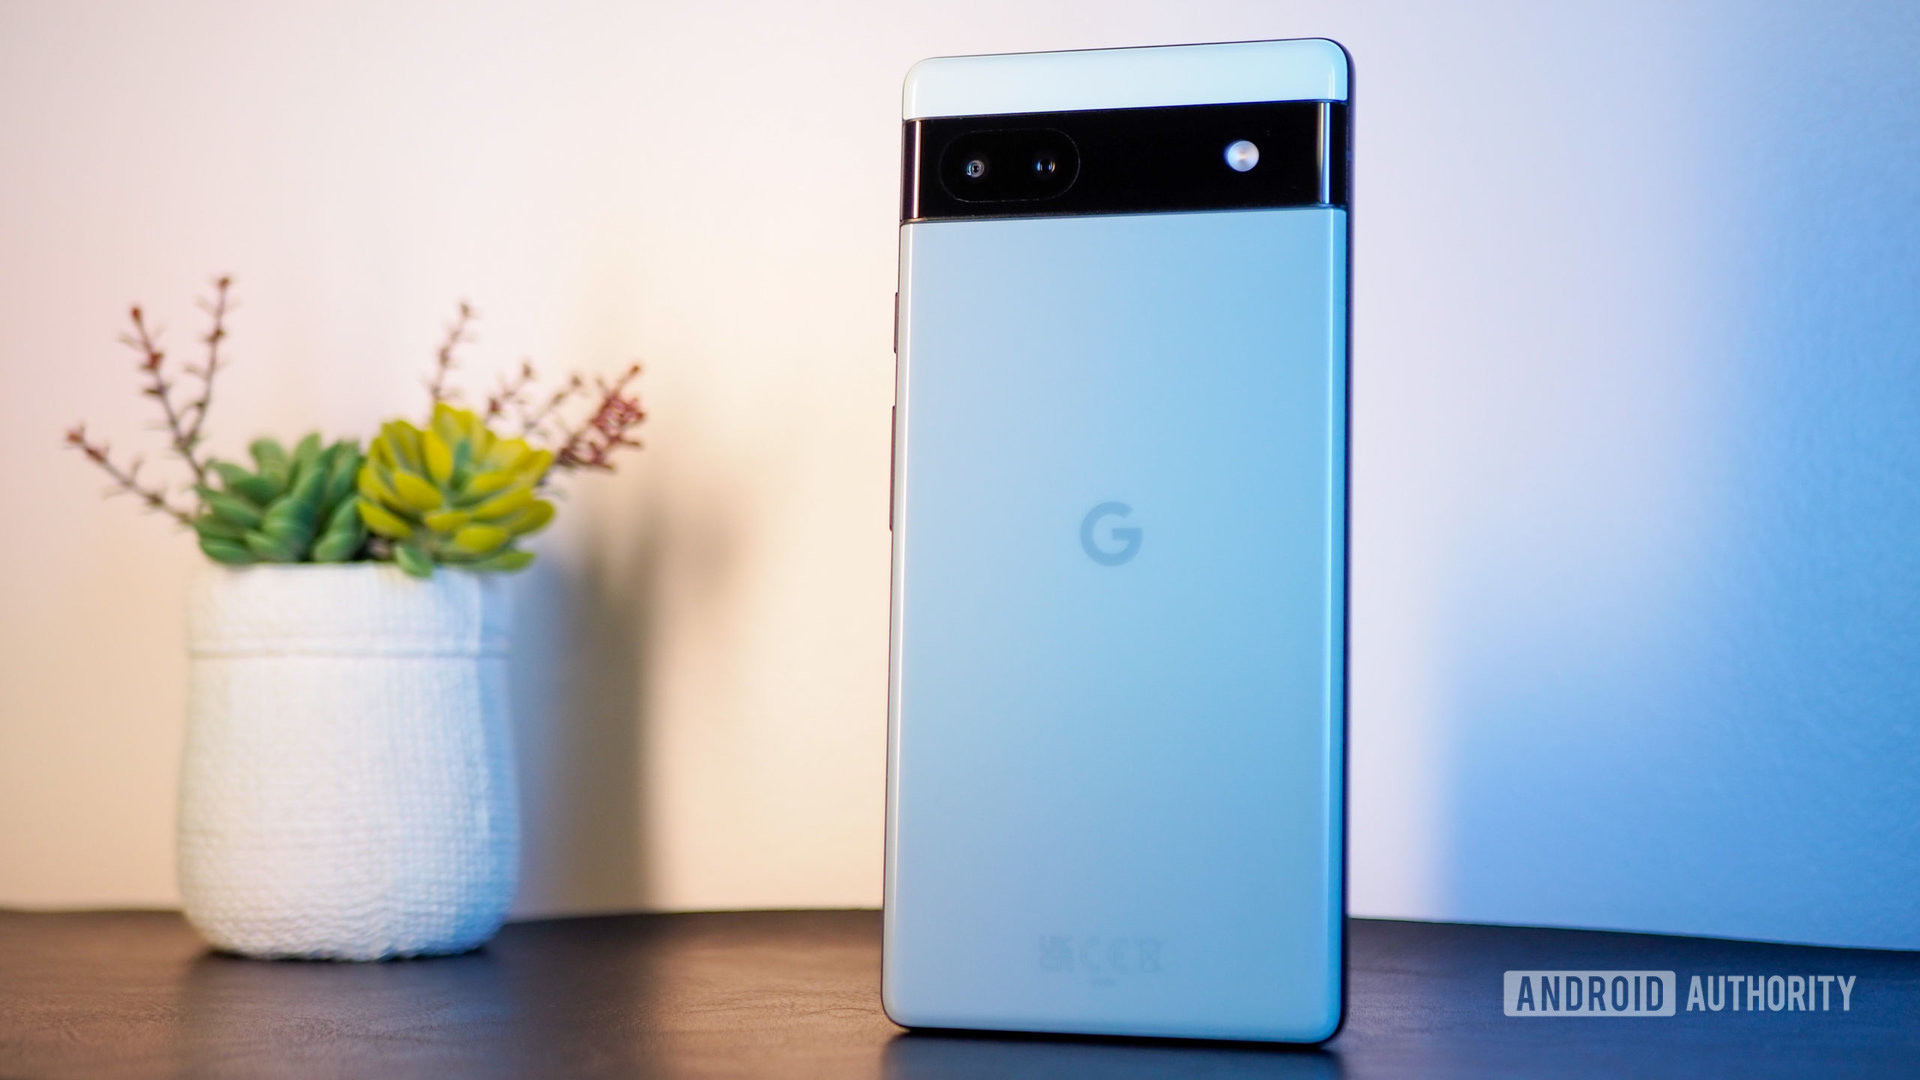 Google Pixel 6a in Sage color, seen from the back